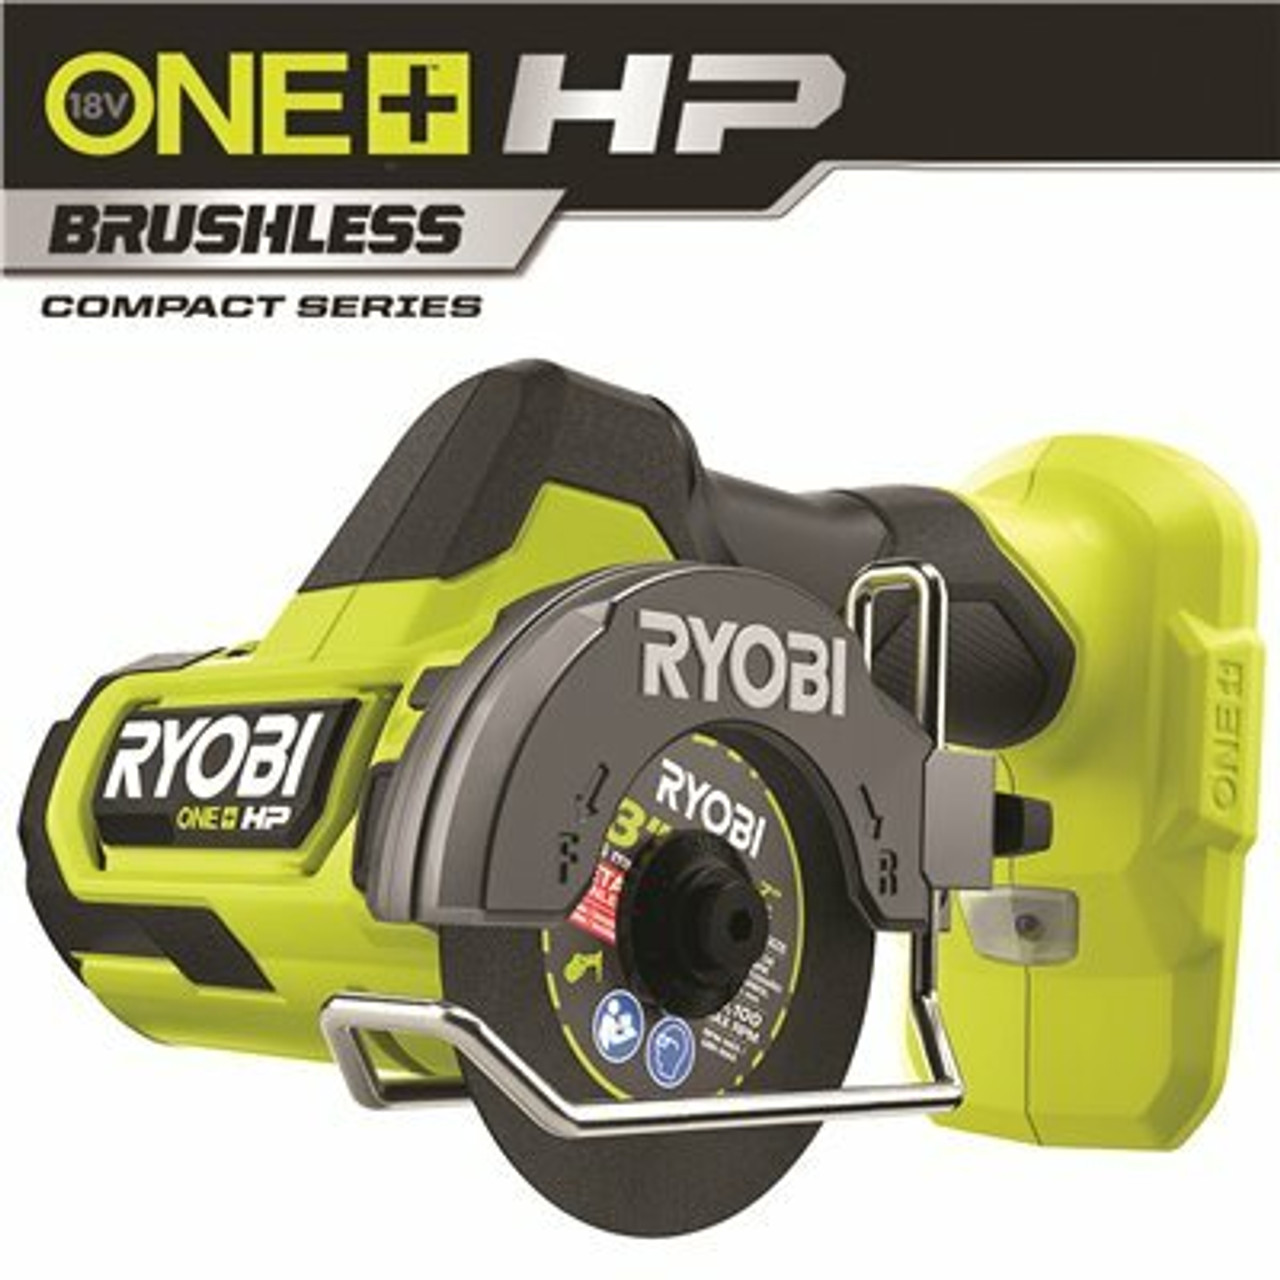 Ryobi One+ Hp 18V Brushless Cordless Compact Cut-Off Tool (Tool Only)